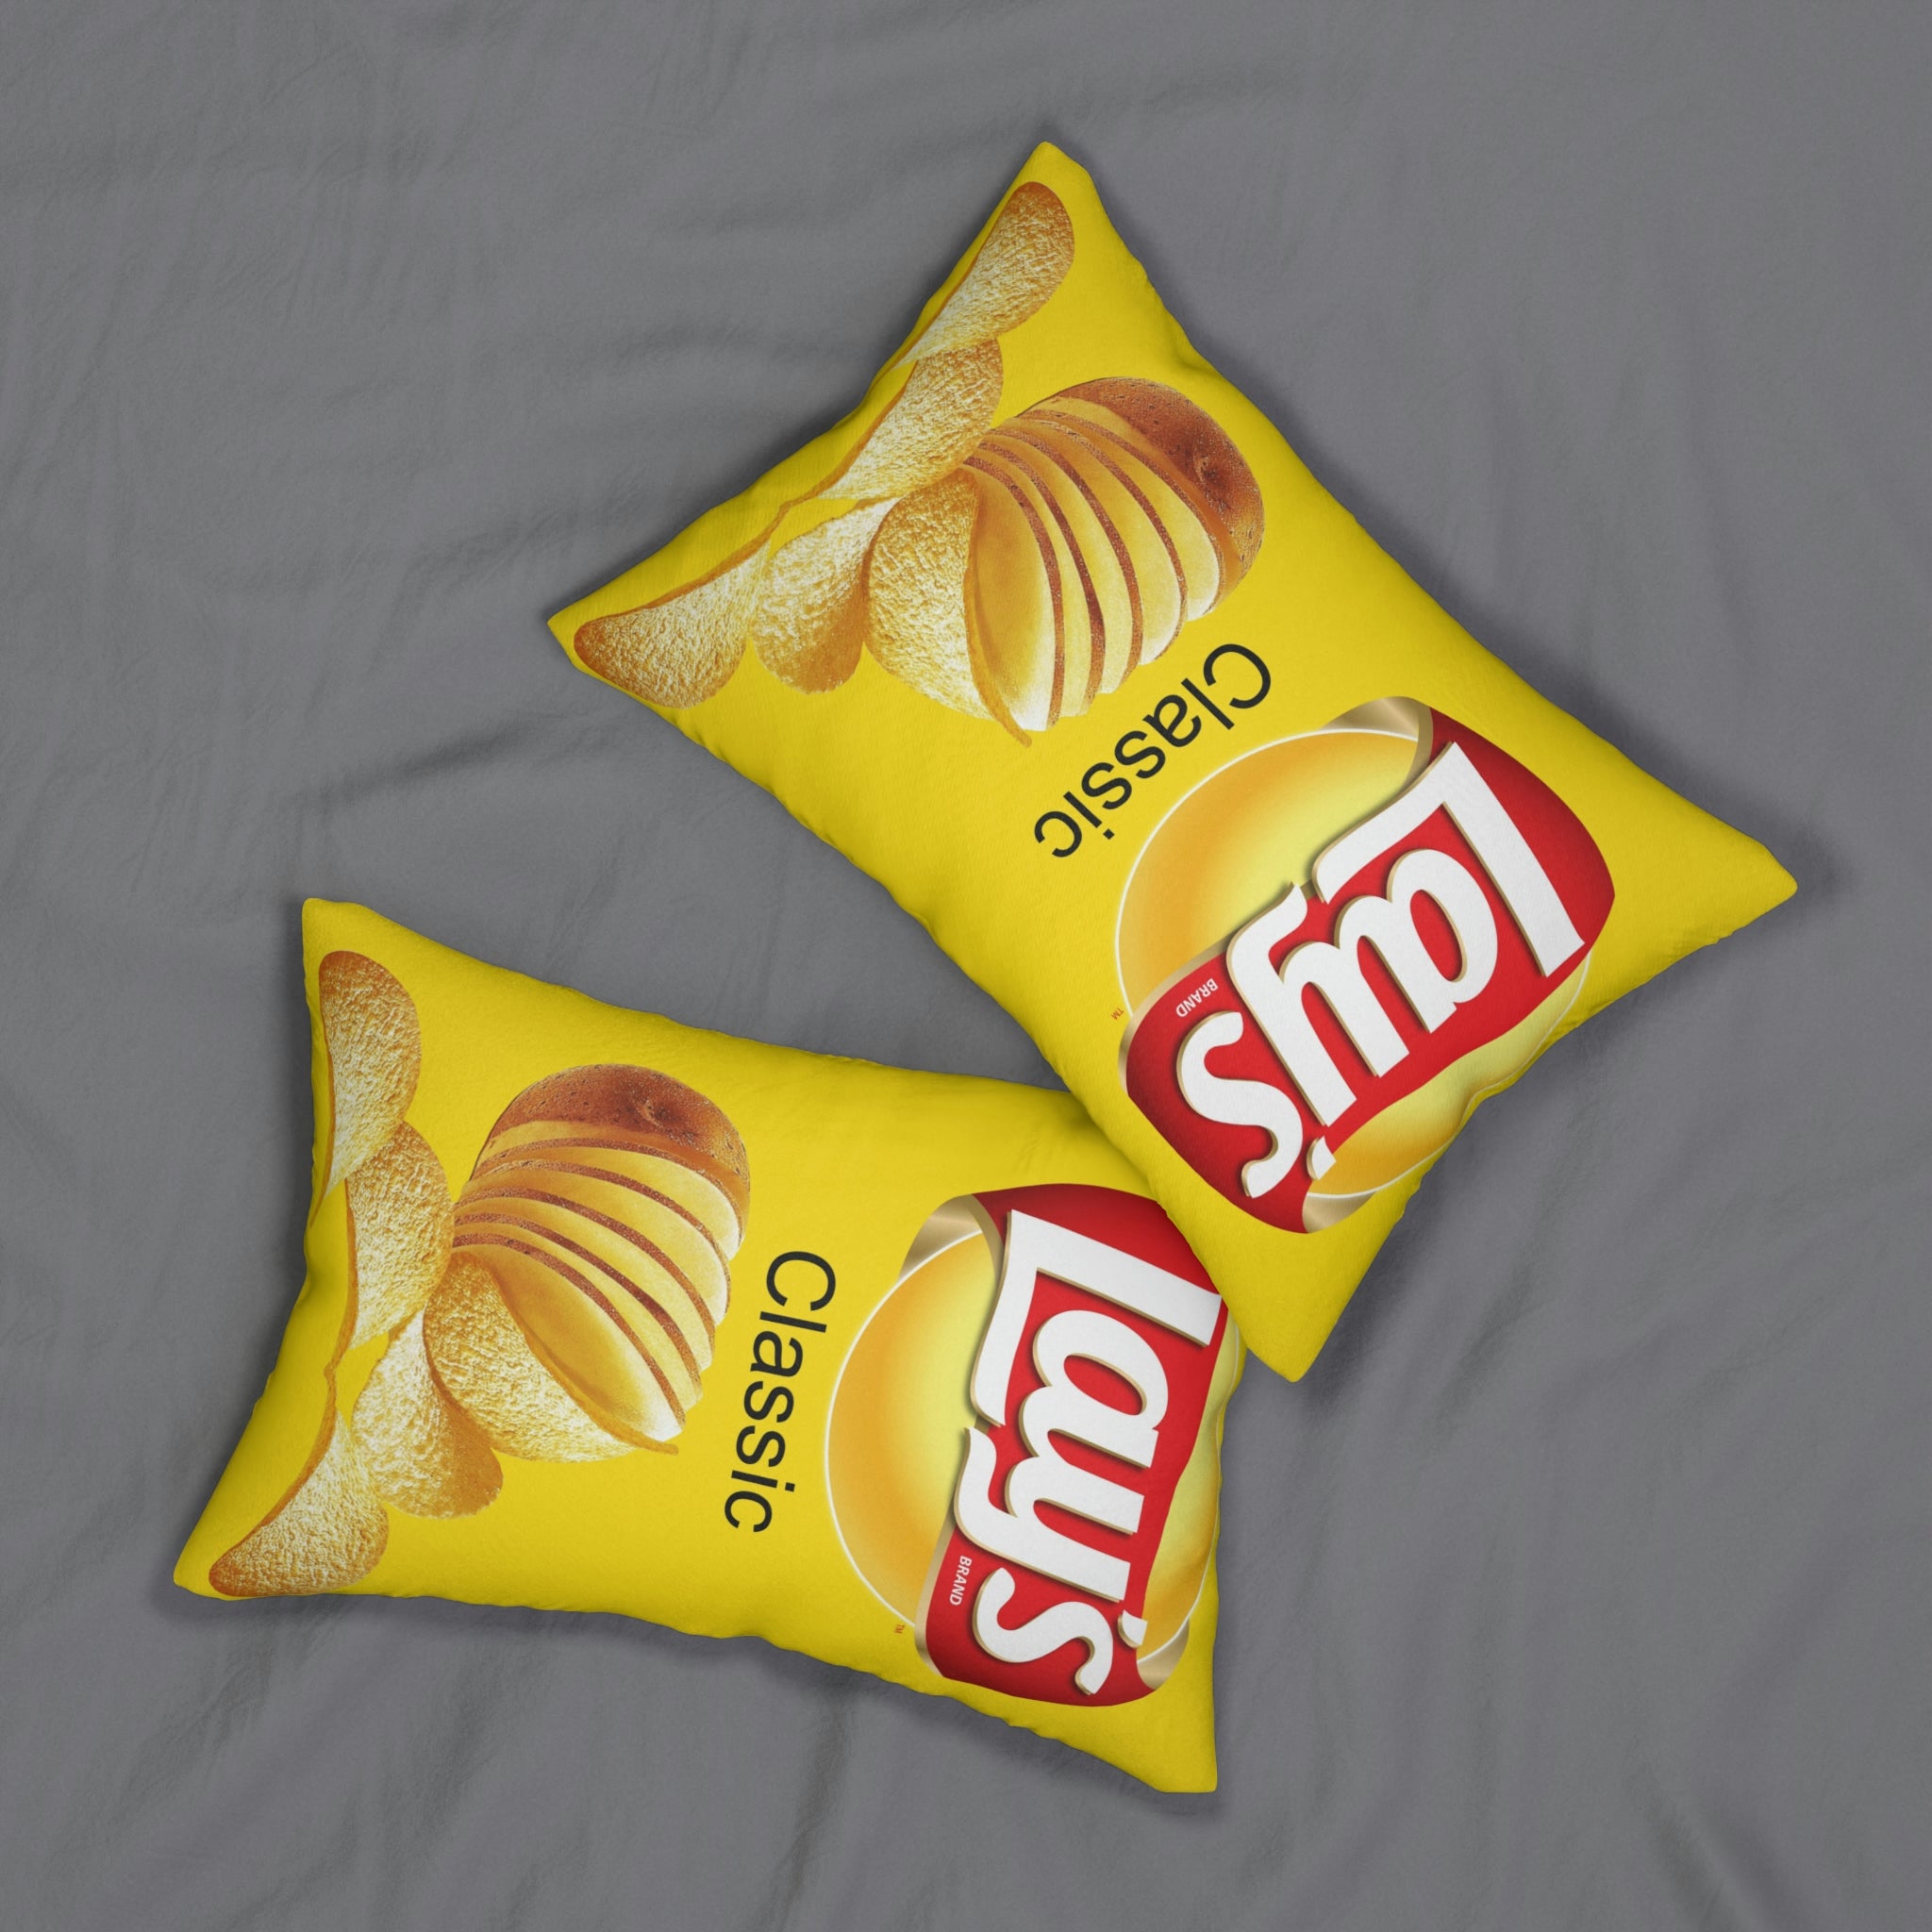 Cute Chips Original Lays Themed Polyester Pillow